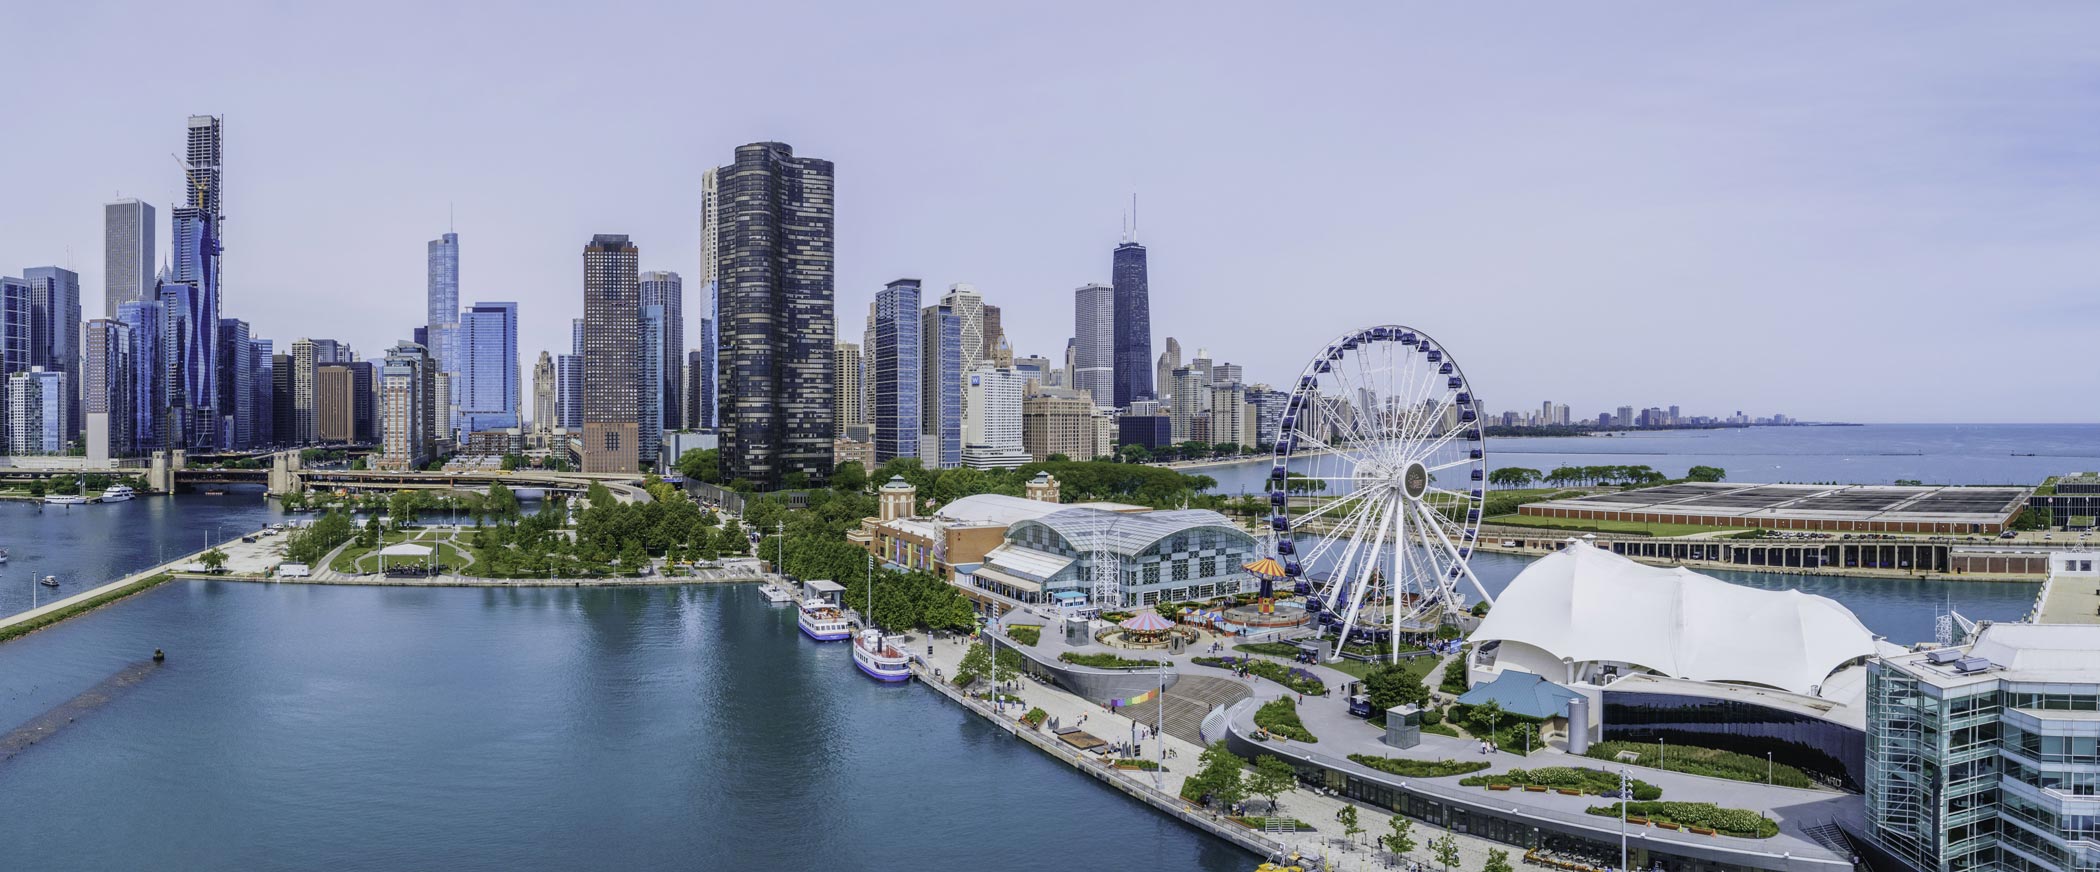 Aerial View of Navy Pier with Chicago Skyline